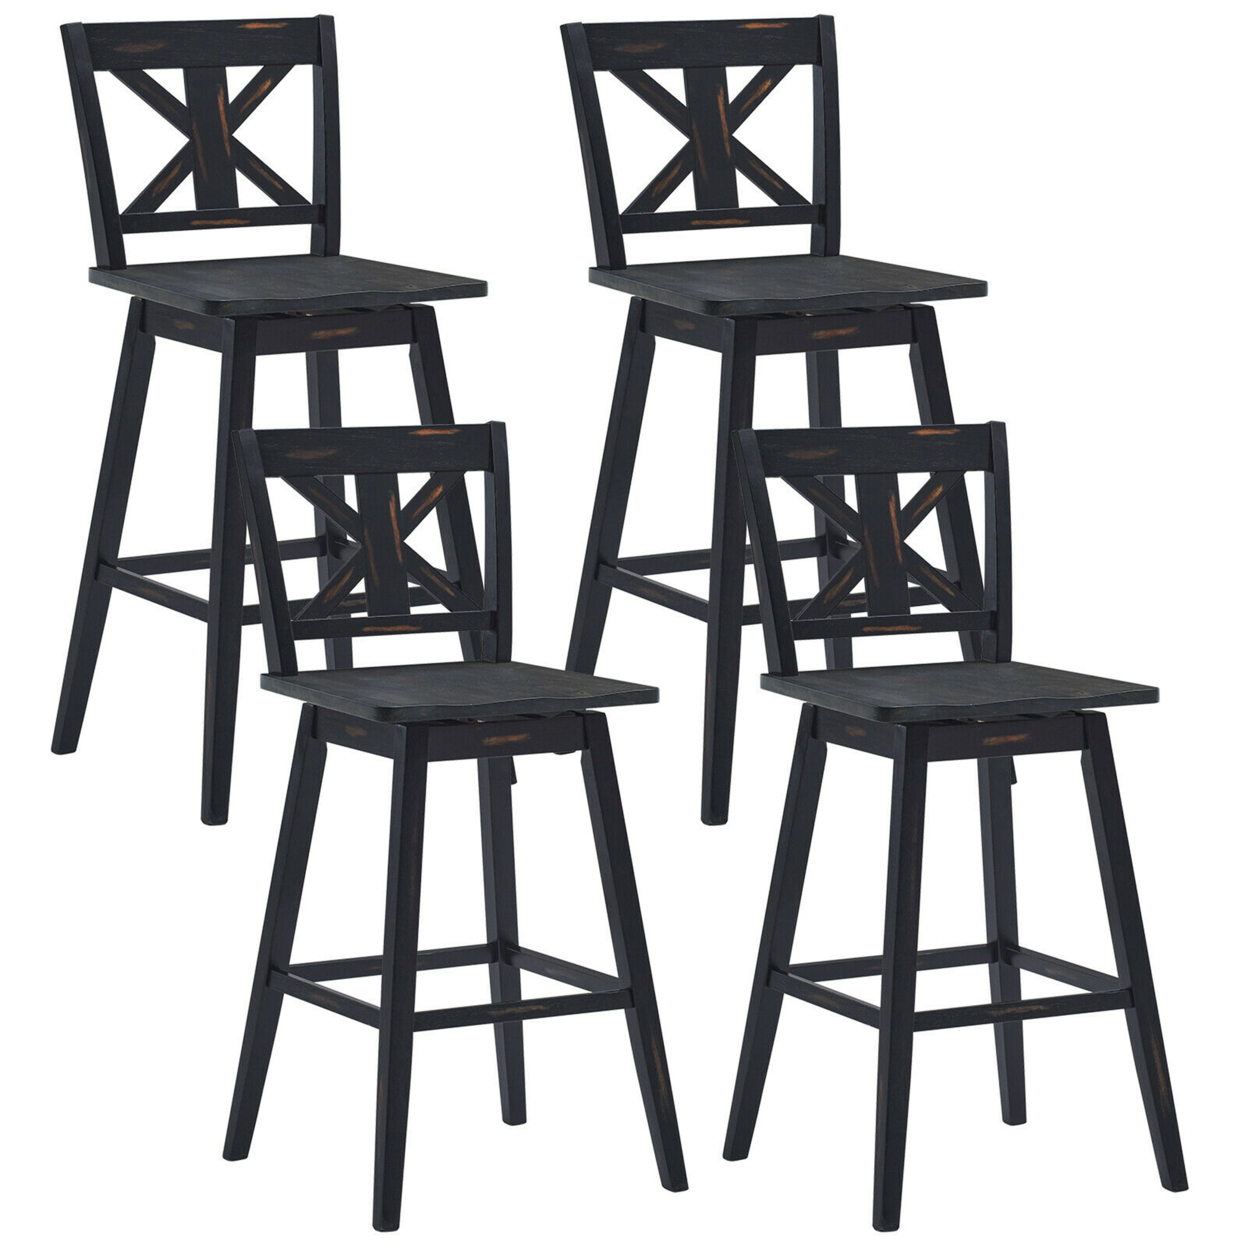 Gymax 4PCS Swivel Bar Stools 29'' Counter Height Chairs W/ Footrest - Black